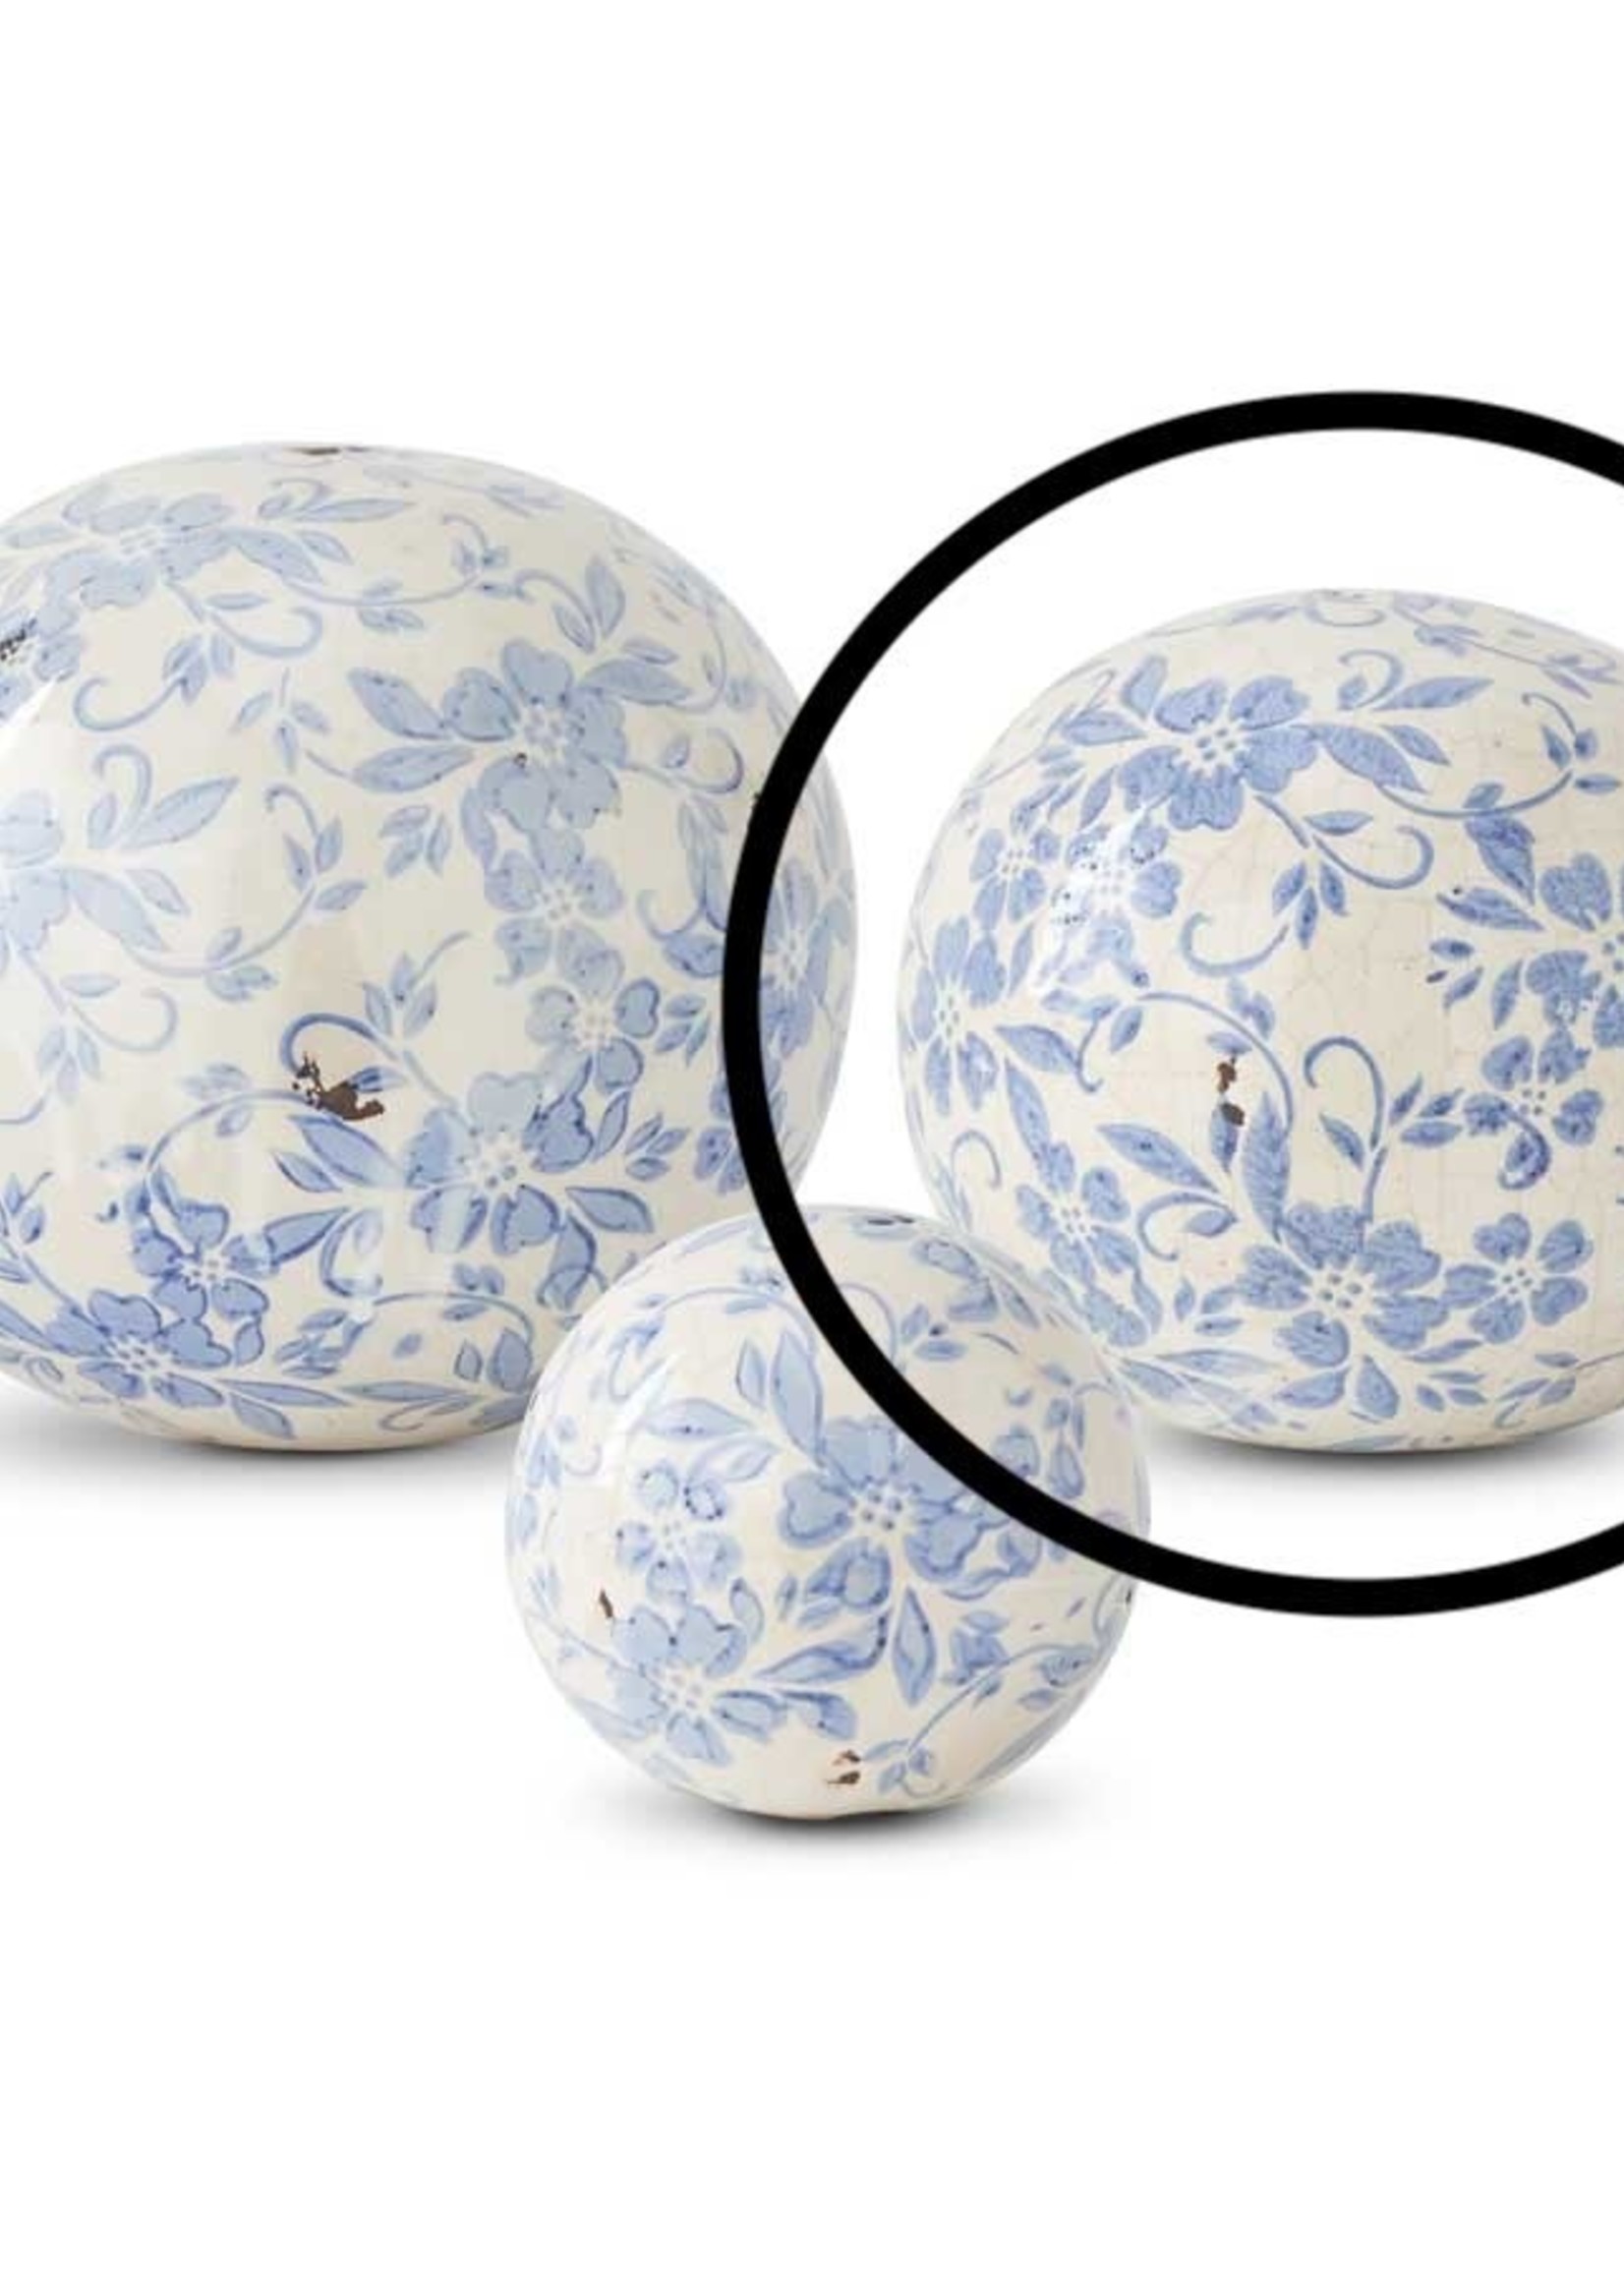 6 inch Vintage Blue and White Ceramic Ball